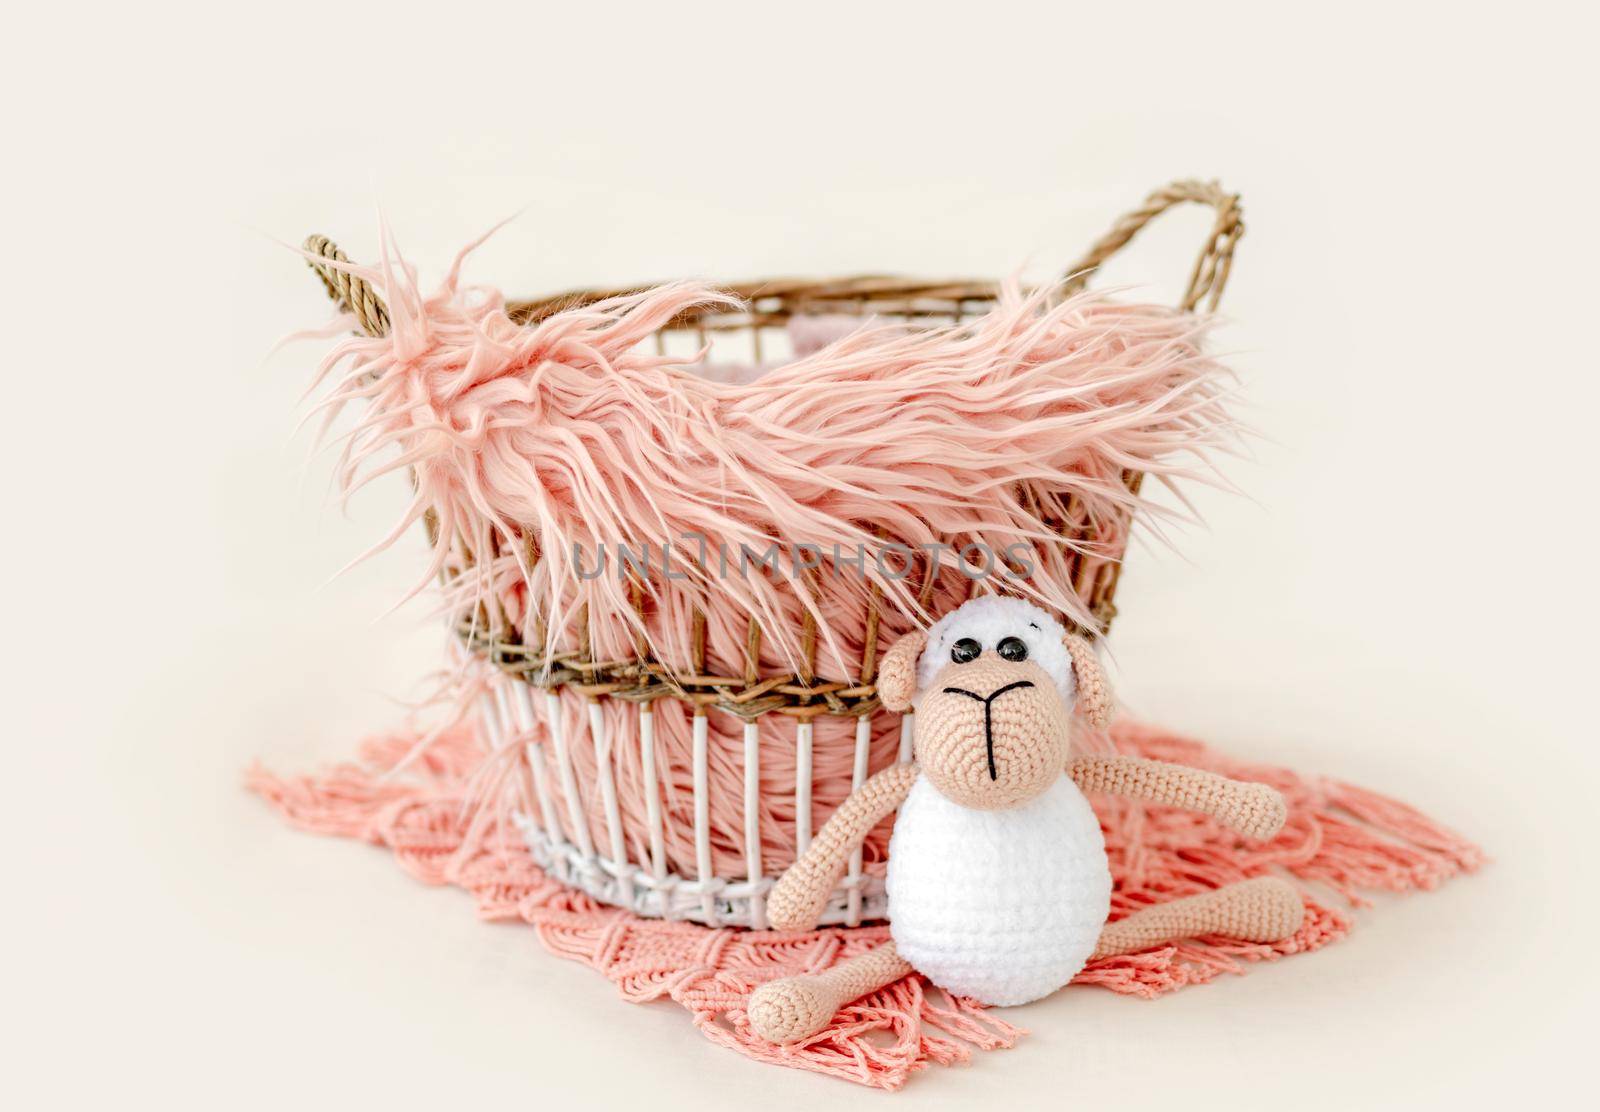 Tiny basket decor for newborn studio photoshoot filled with fur and knitted toy closeup. Infant baby handmade furniture